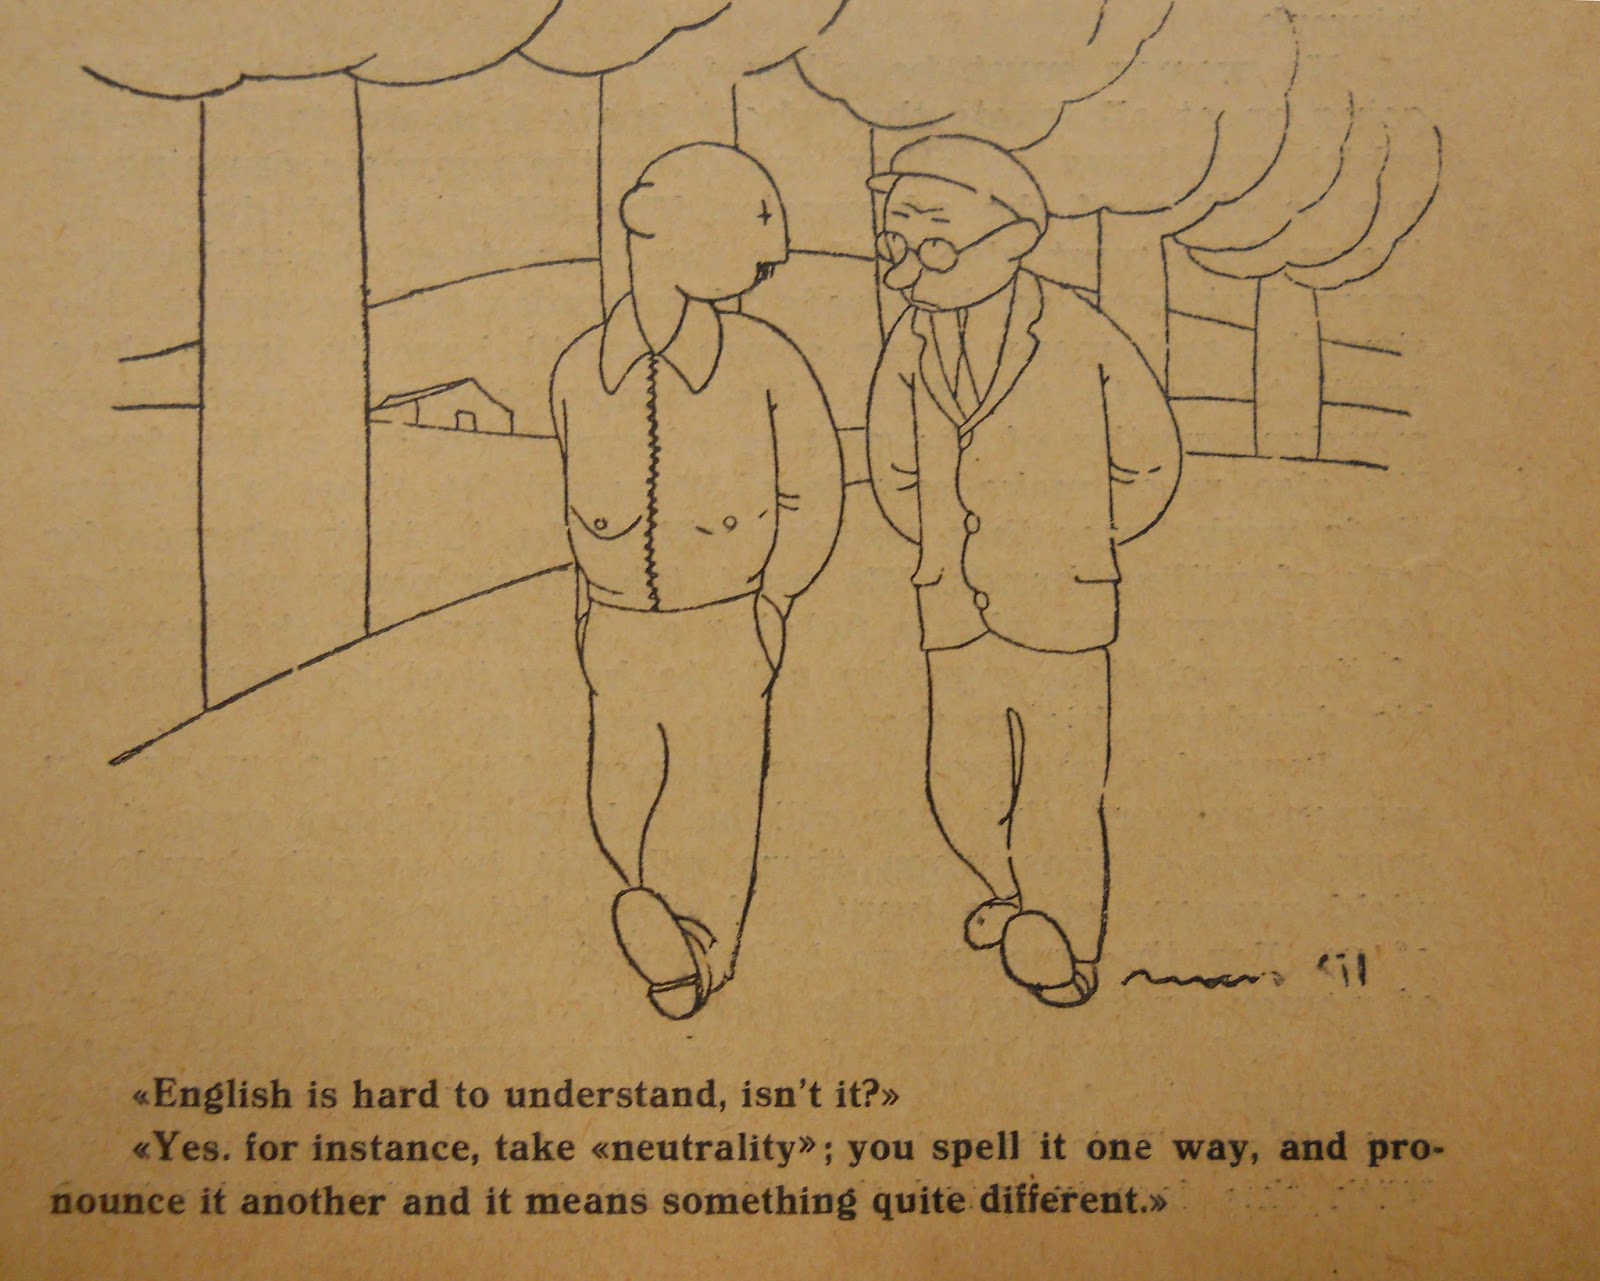 Cartoon depicting two men walking as they discuss the concept of 'neutrality'